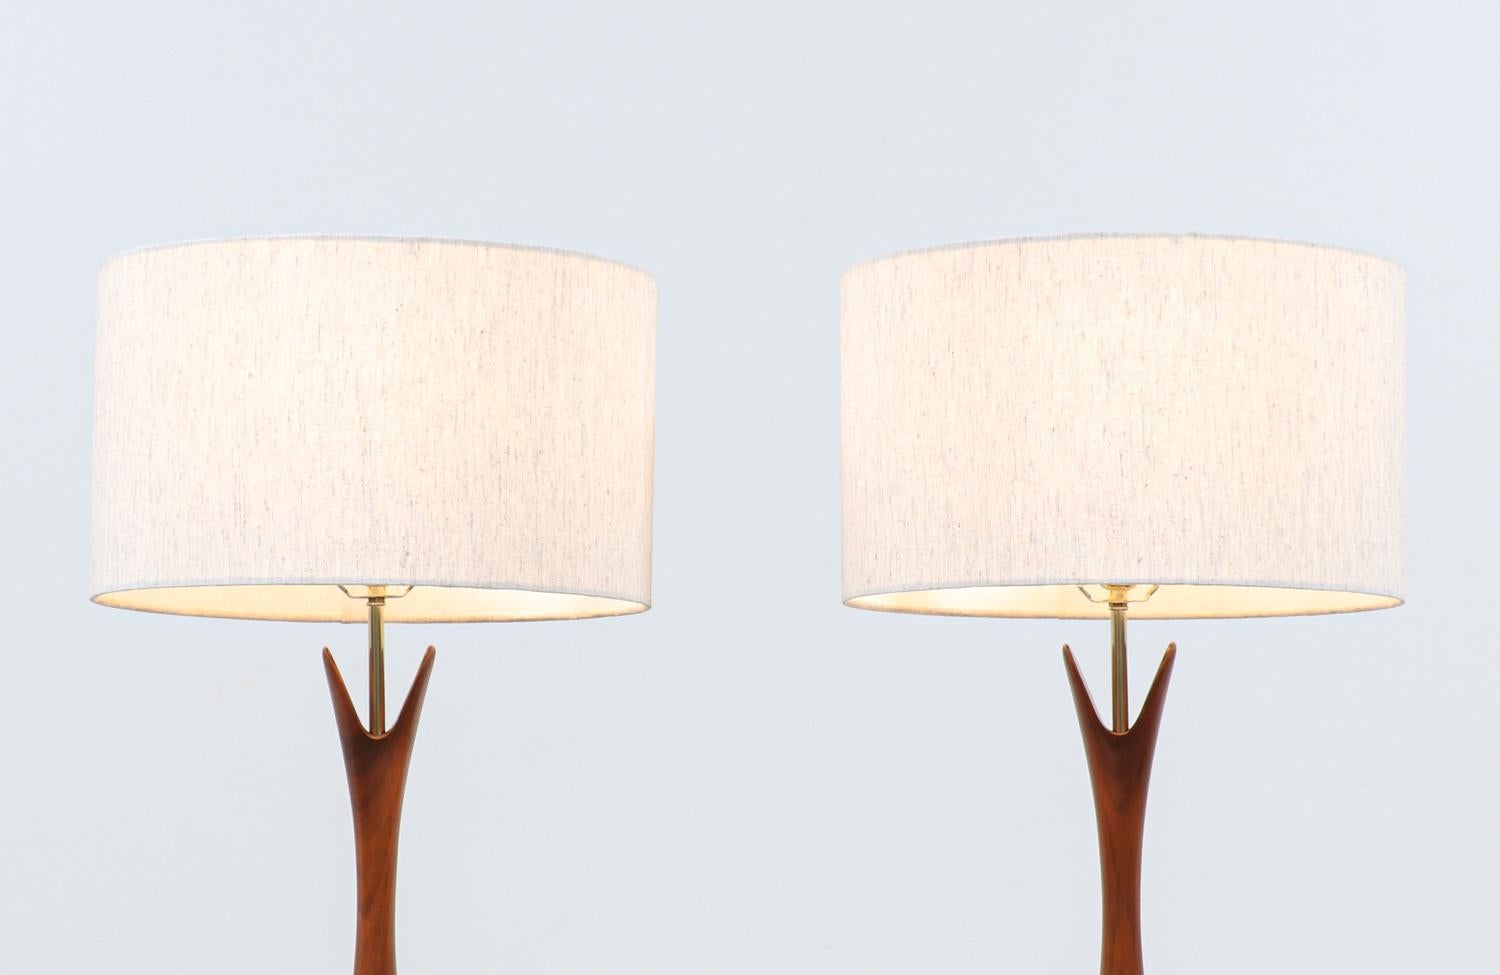 American Mid-Century Modern Sculpted Walnut Table Lamps by Modernera Lamp Co.